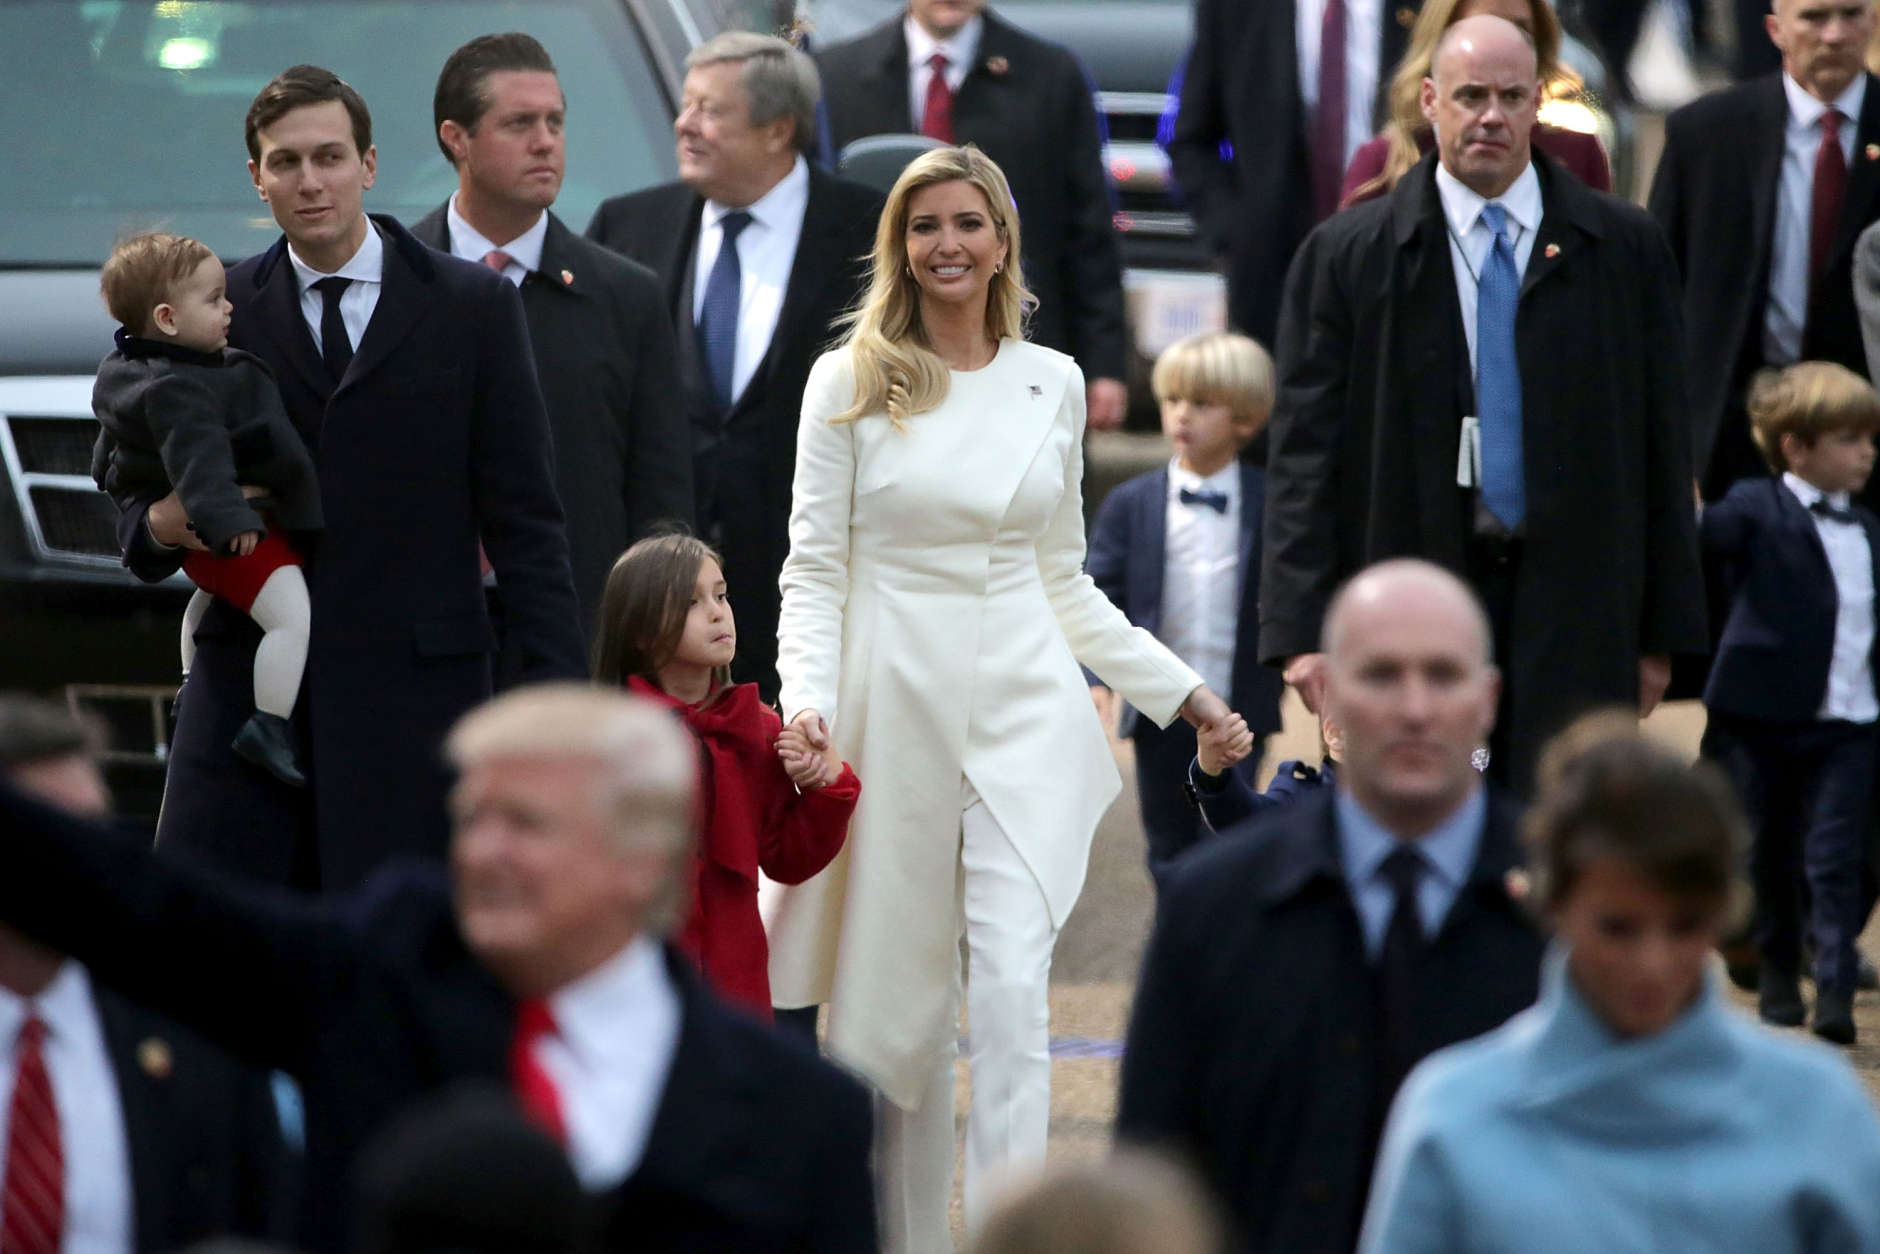 WASHINGTON, DC - JANUARY 20:  Jared Kushner, holding son Theodore Kushner, walks with wife Ivanka Trump and daughter Arabella Kusner behind U.S. President Donald J. Trump and first lady Melania Trump down Pennsylvania Avenue in front of the White House during the Inaugural Parade January 20, 2017 in Washington, DC. Donald J. Trump was sworn in today as the 45th president of the United States.  (Photo by Chip Somodevilla/Getty Images)